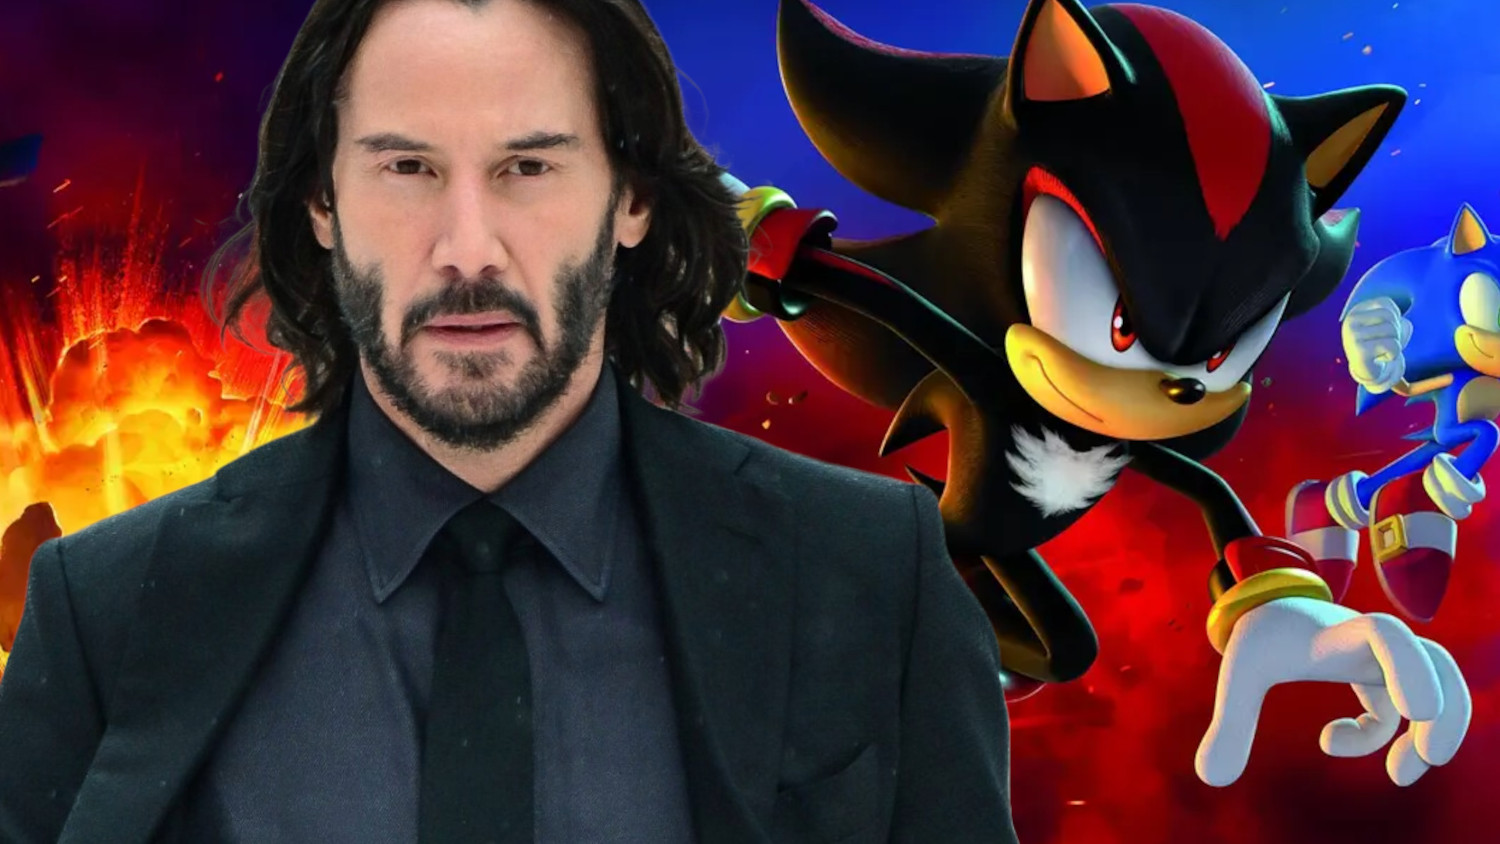 Sonic 3 First Look Shows Off Keanu Reeves ‘Fearless Year of Shadow’